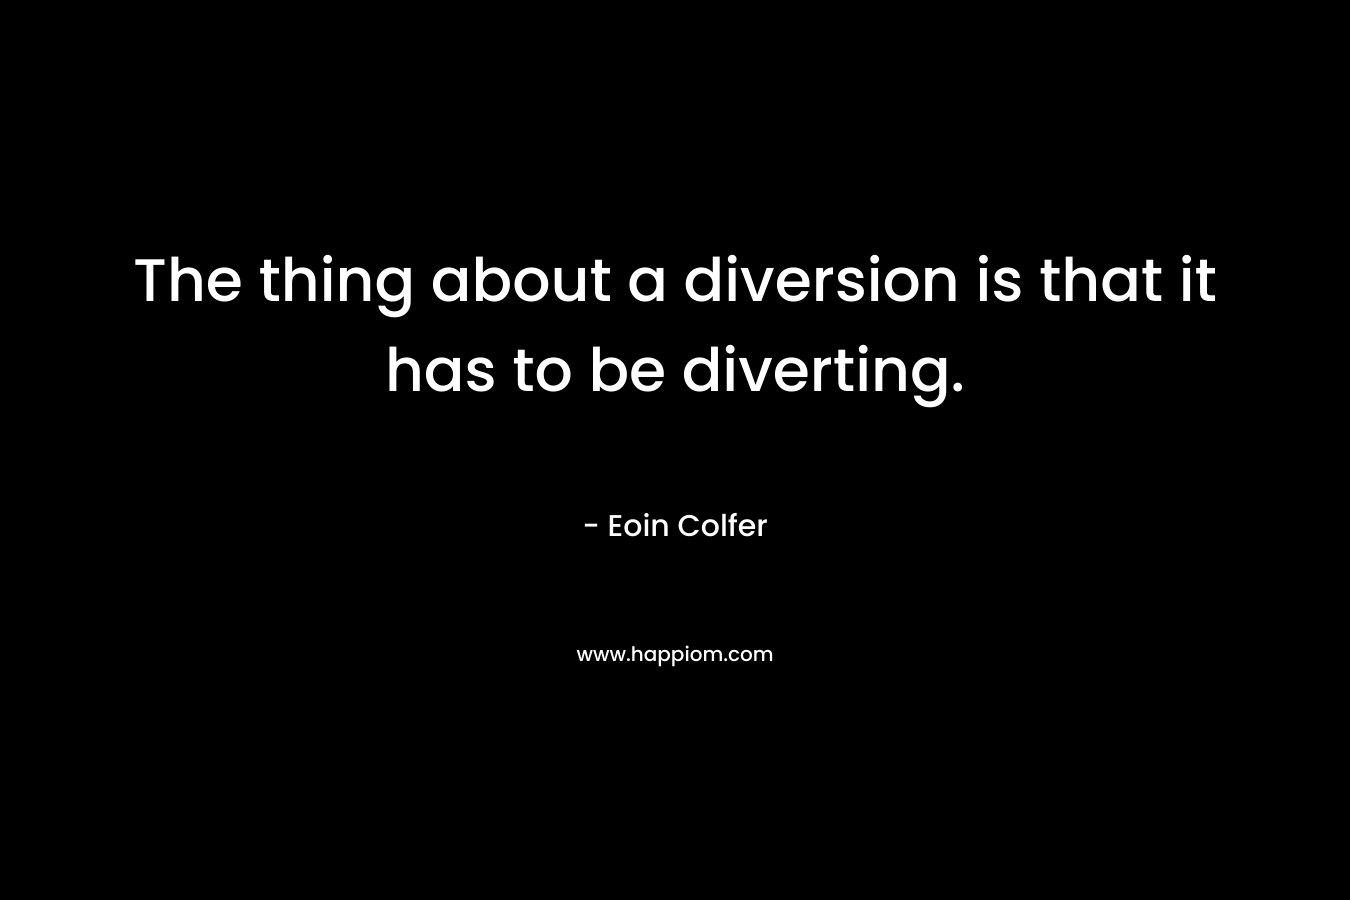 The thing about a diversion is that it has to be diverting.